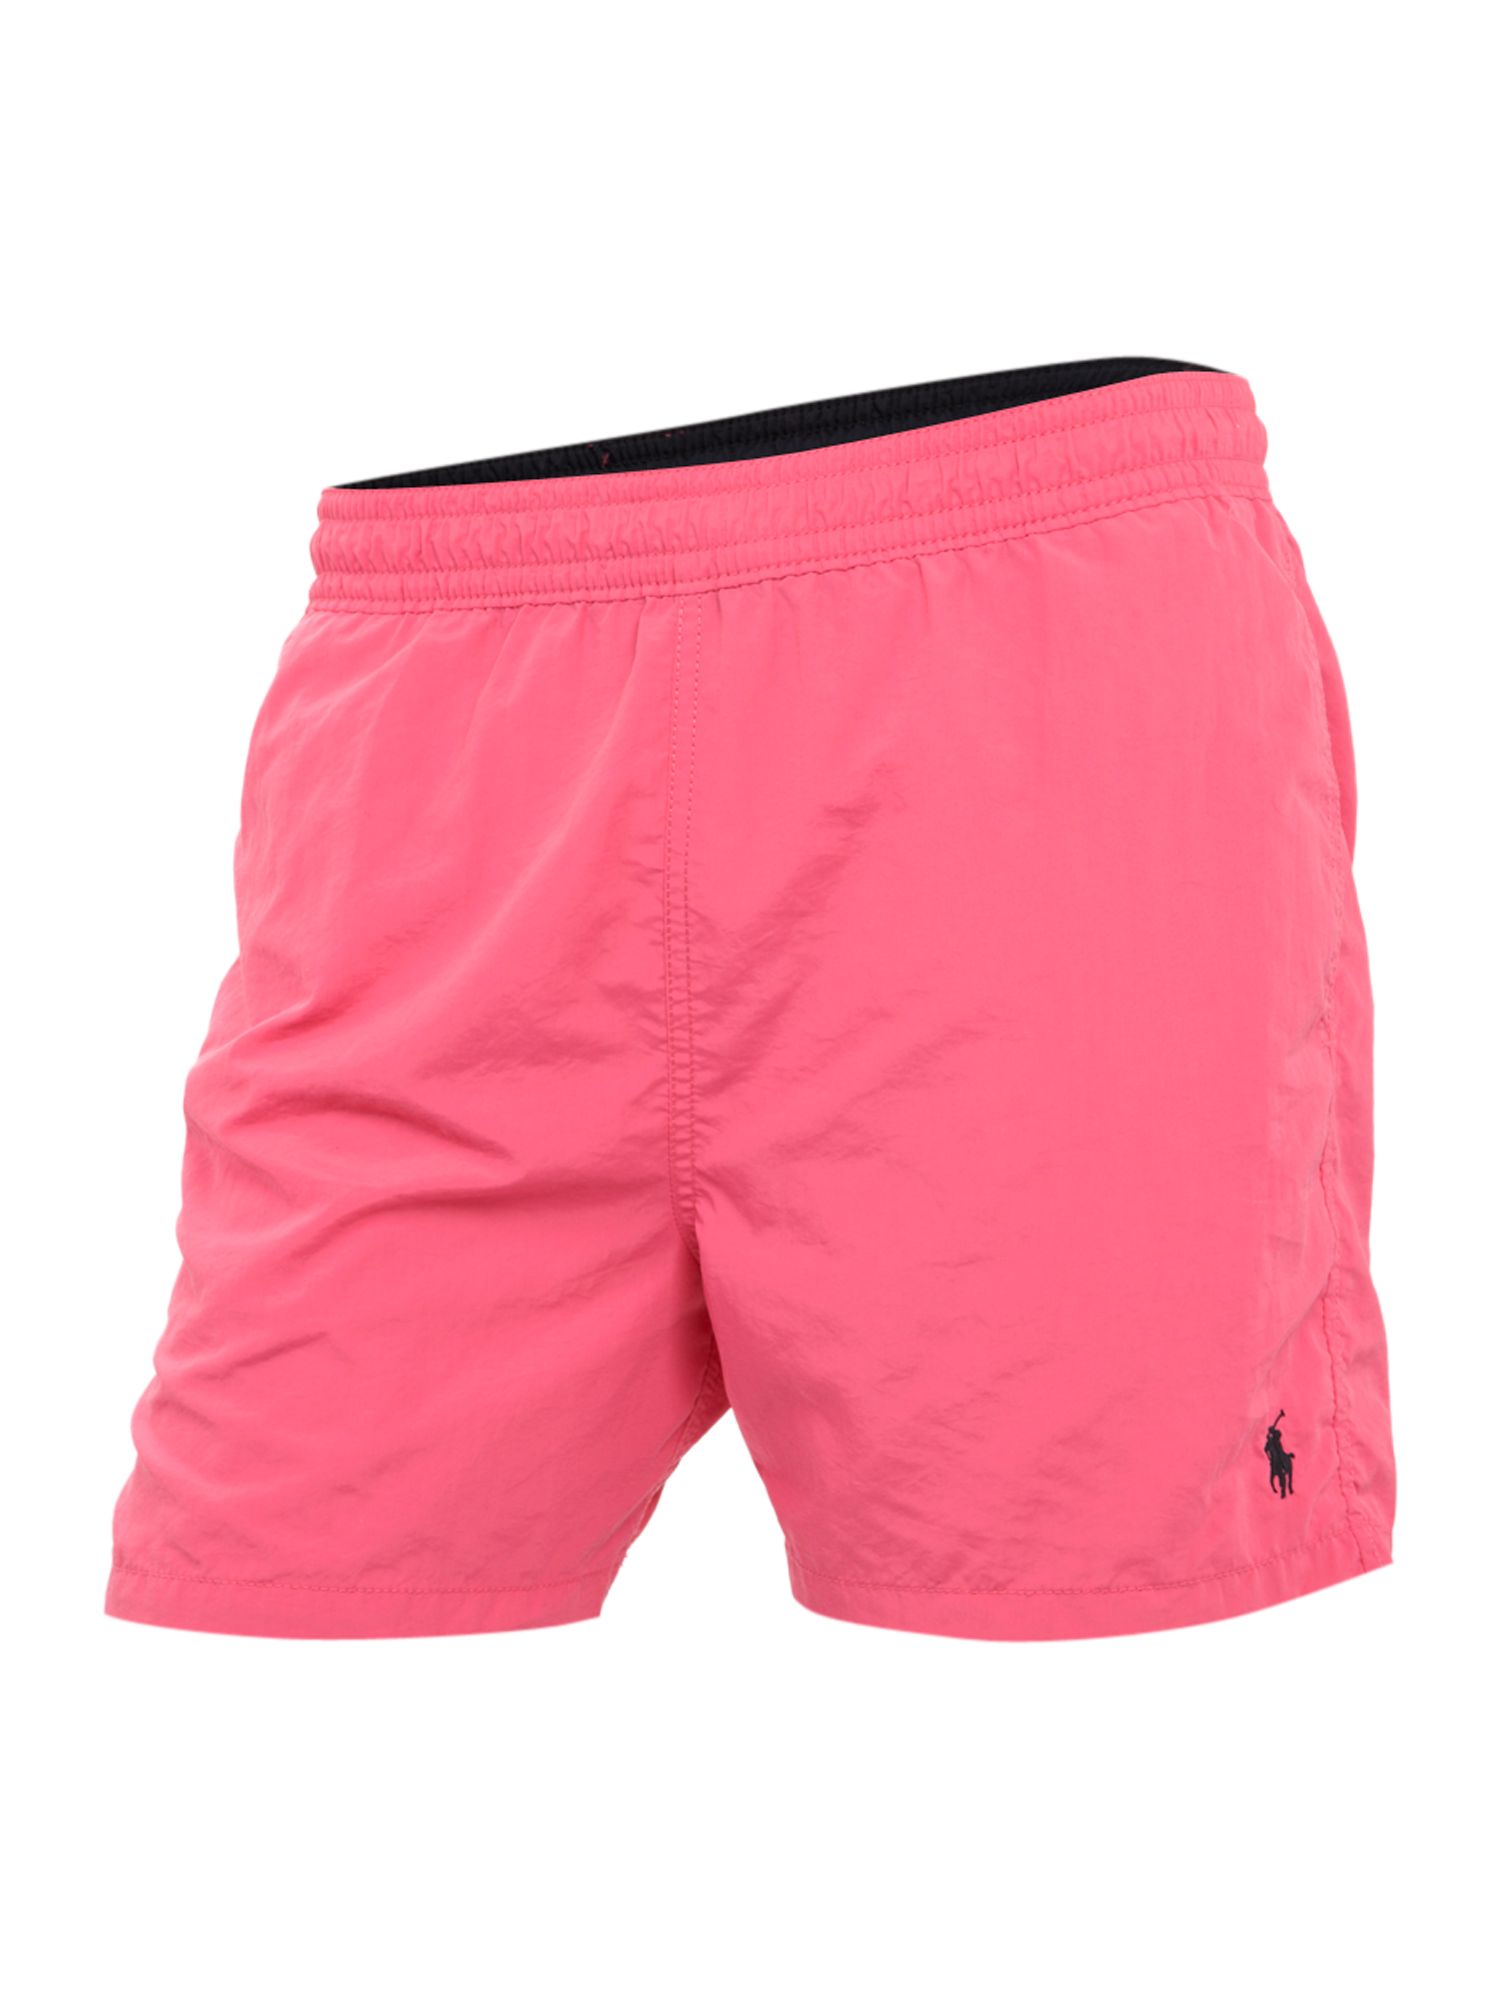 Polo ralph lauren Classic Swim Shorts in Pink for Men (Hot Pink) | Lyst